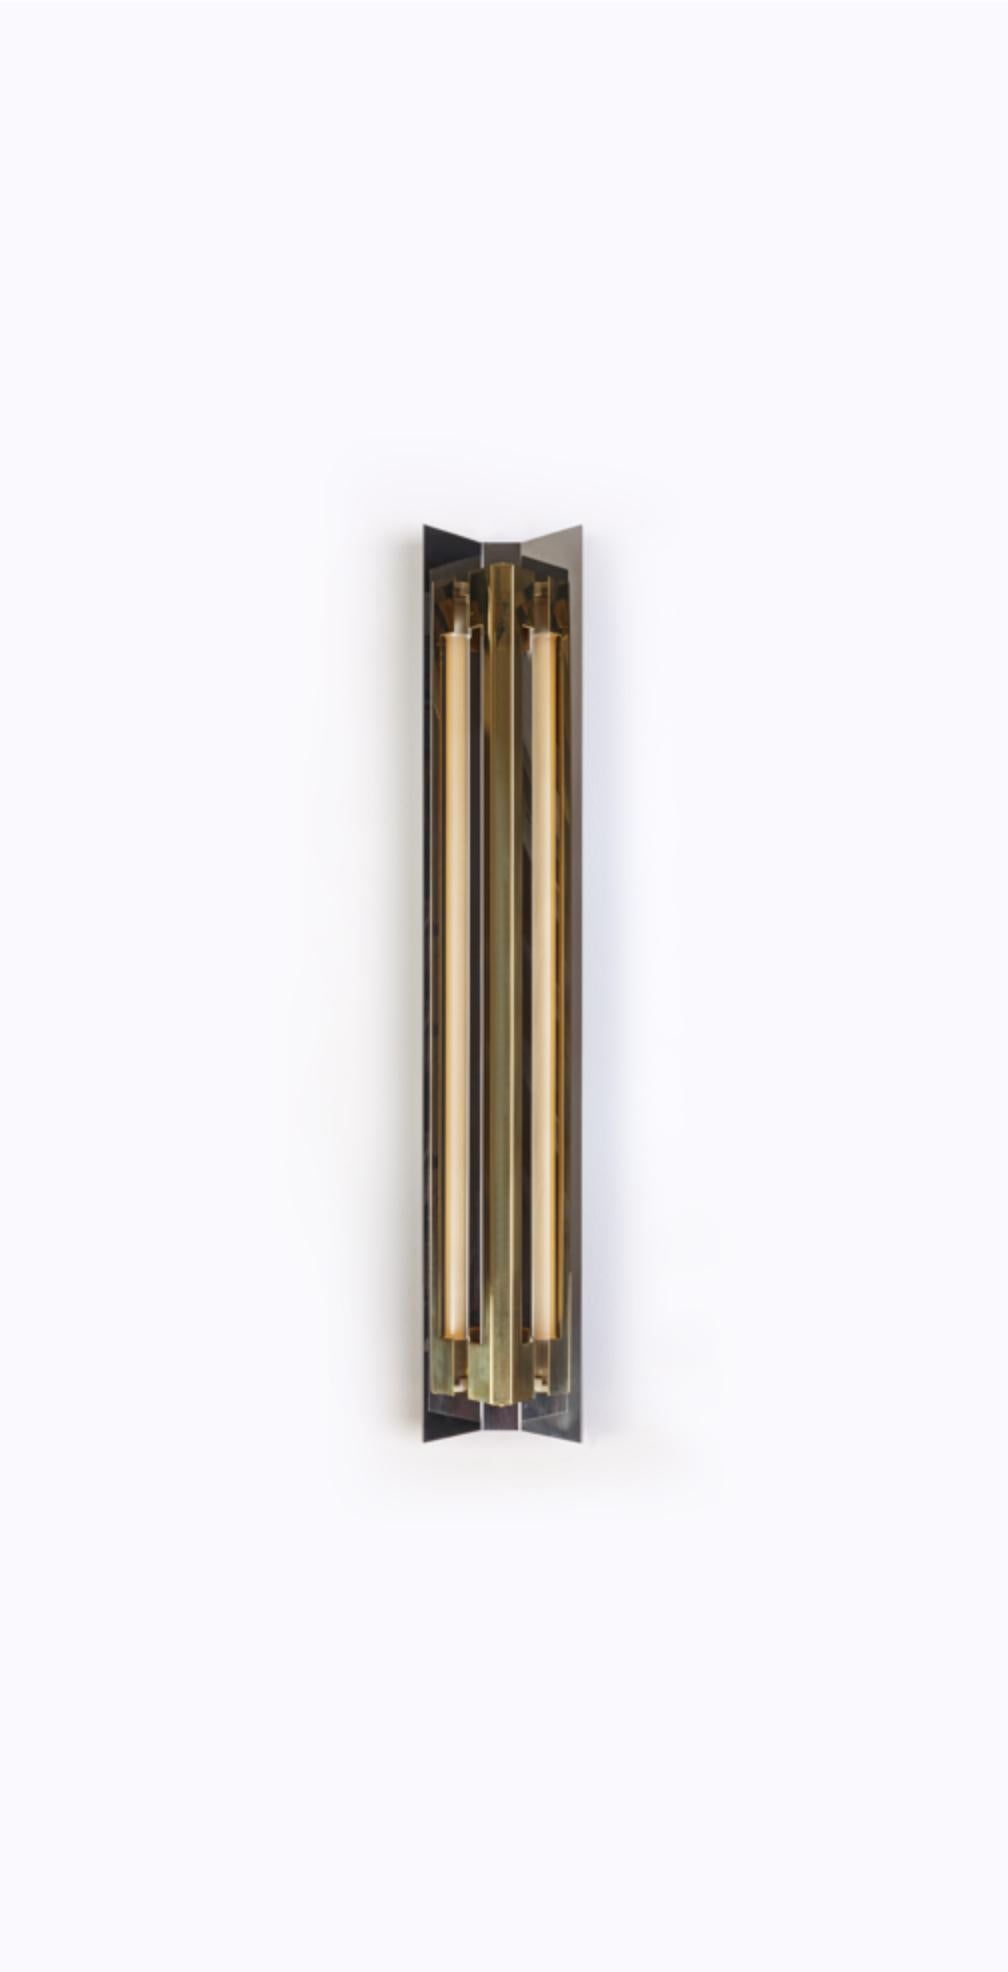 Extra Large Misalliance solid brass wall light by Lexavala
Dimensions: D 16 x W 160 x H 8 cm
Materials: Brass.

There are two lenghts of socket covers, extending over the LED. Two short are to be found in Suspended and Surface, and one long in